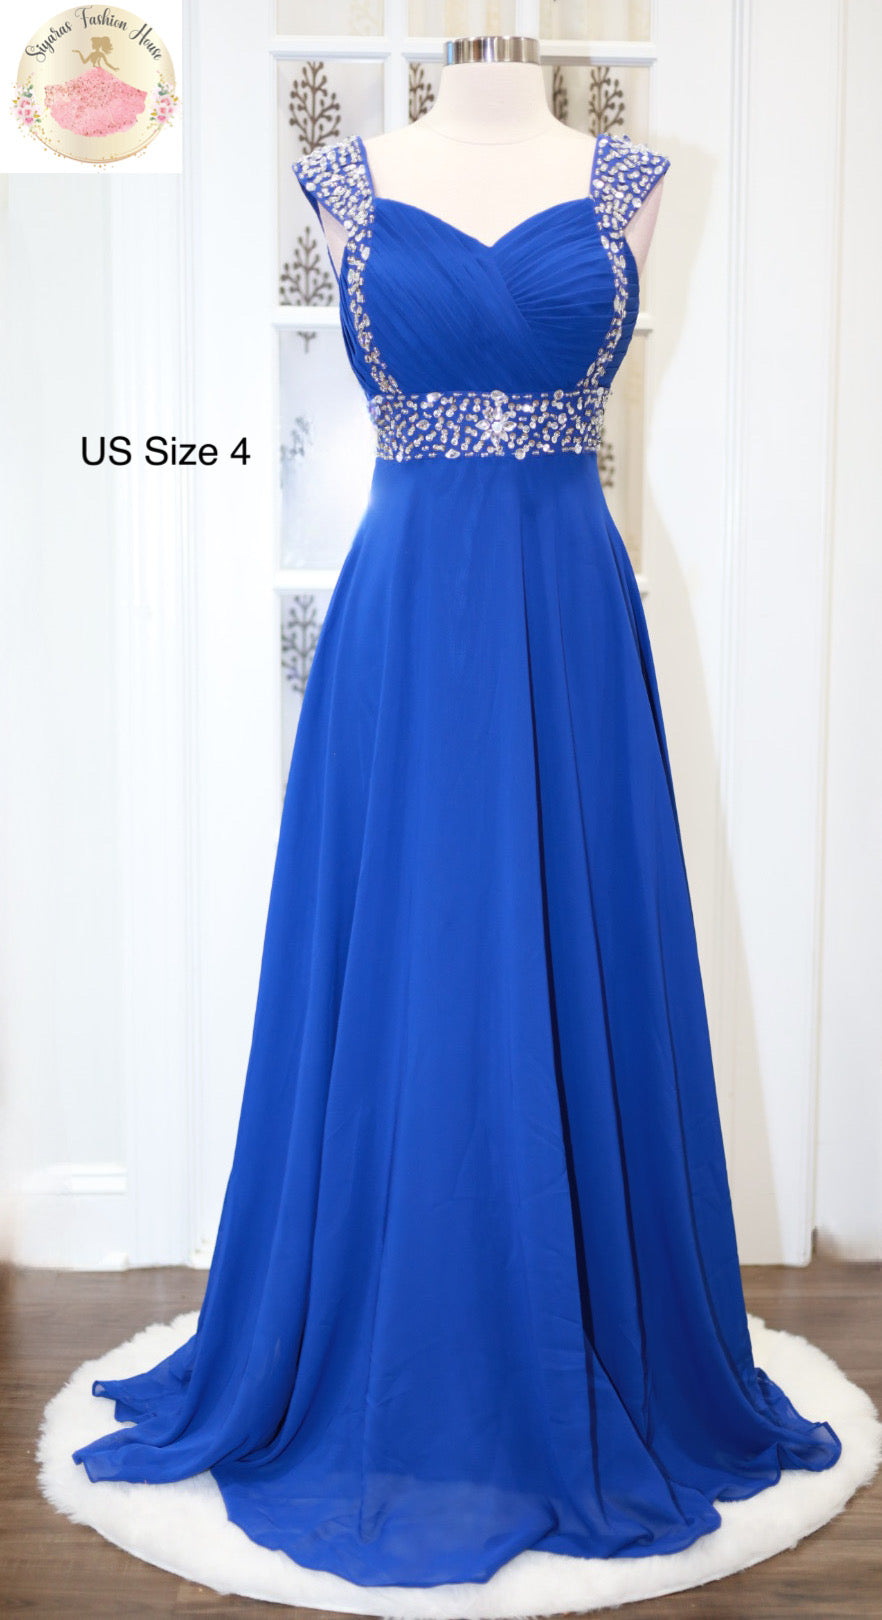 Very Pretty Prom Gown Flowy Floor Length A line  with sequin and bead embellishments Ships from NcUsA